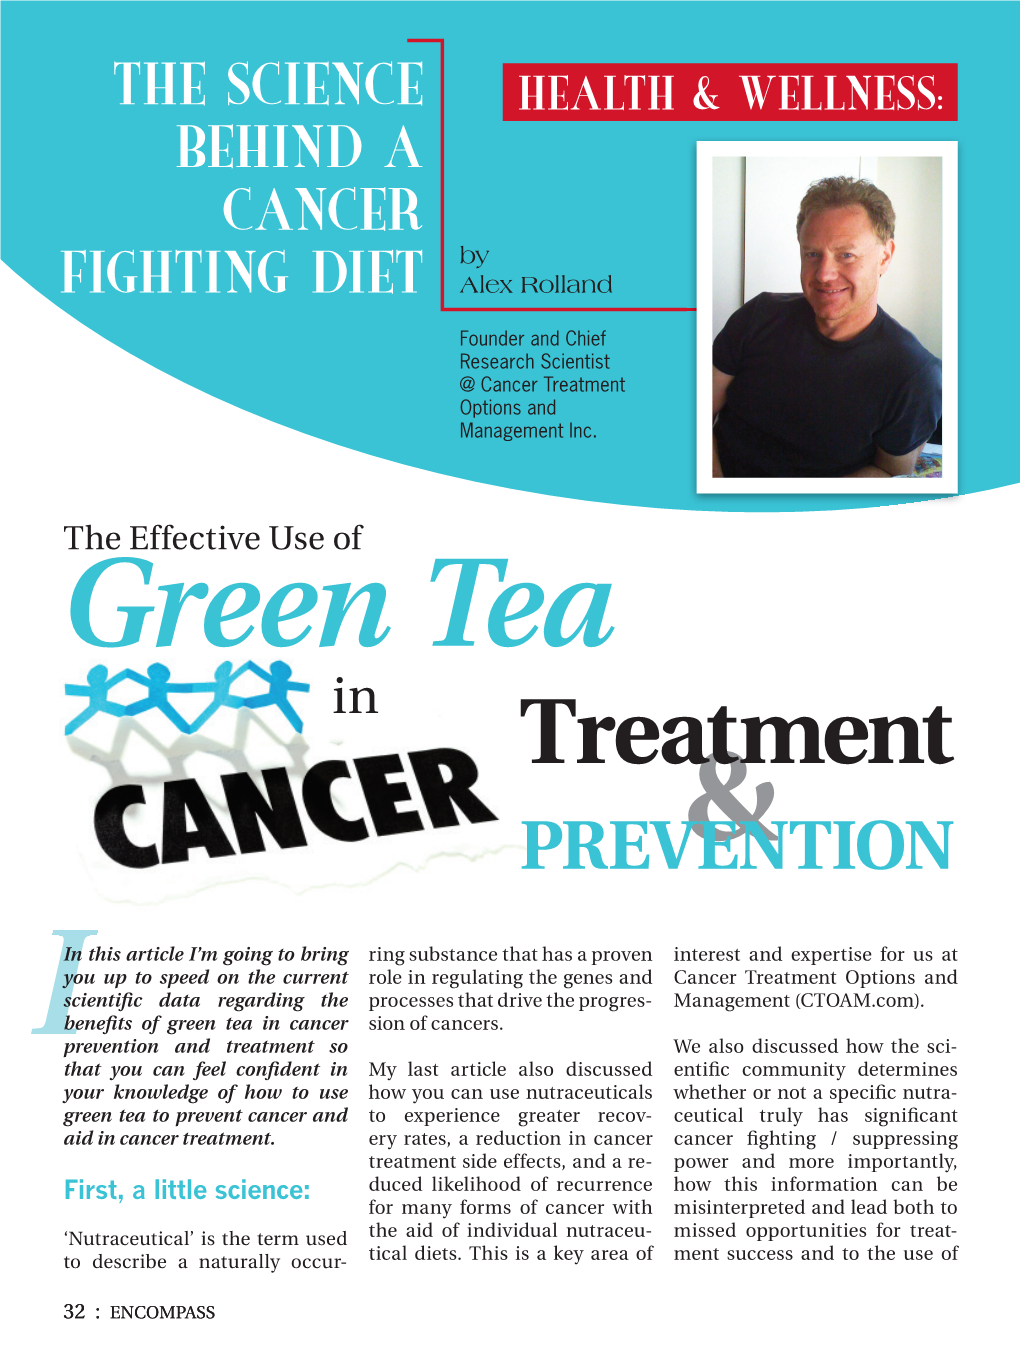 The Effective Use of Green Tea in Cancer Treatment and Prevention